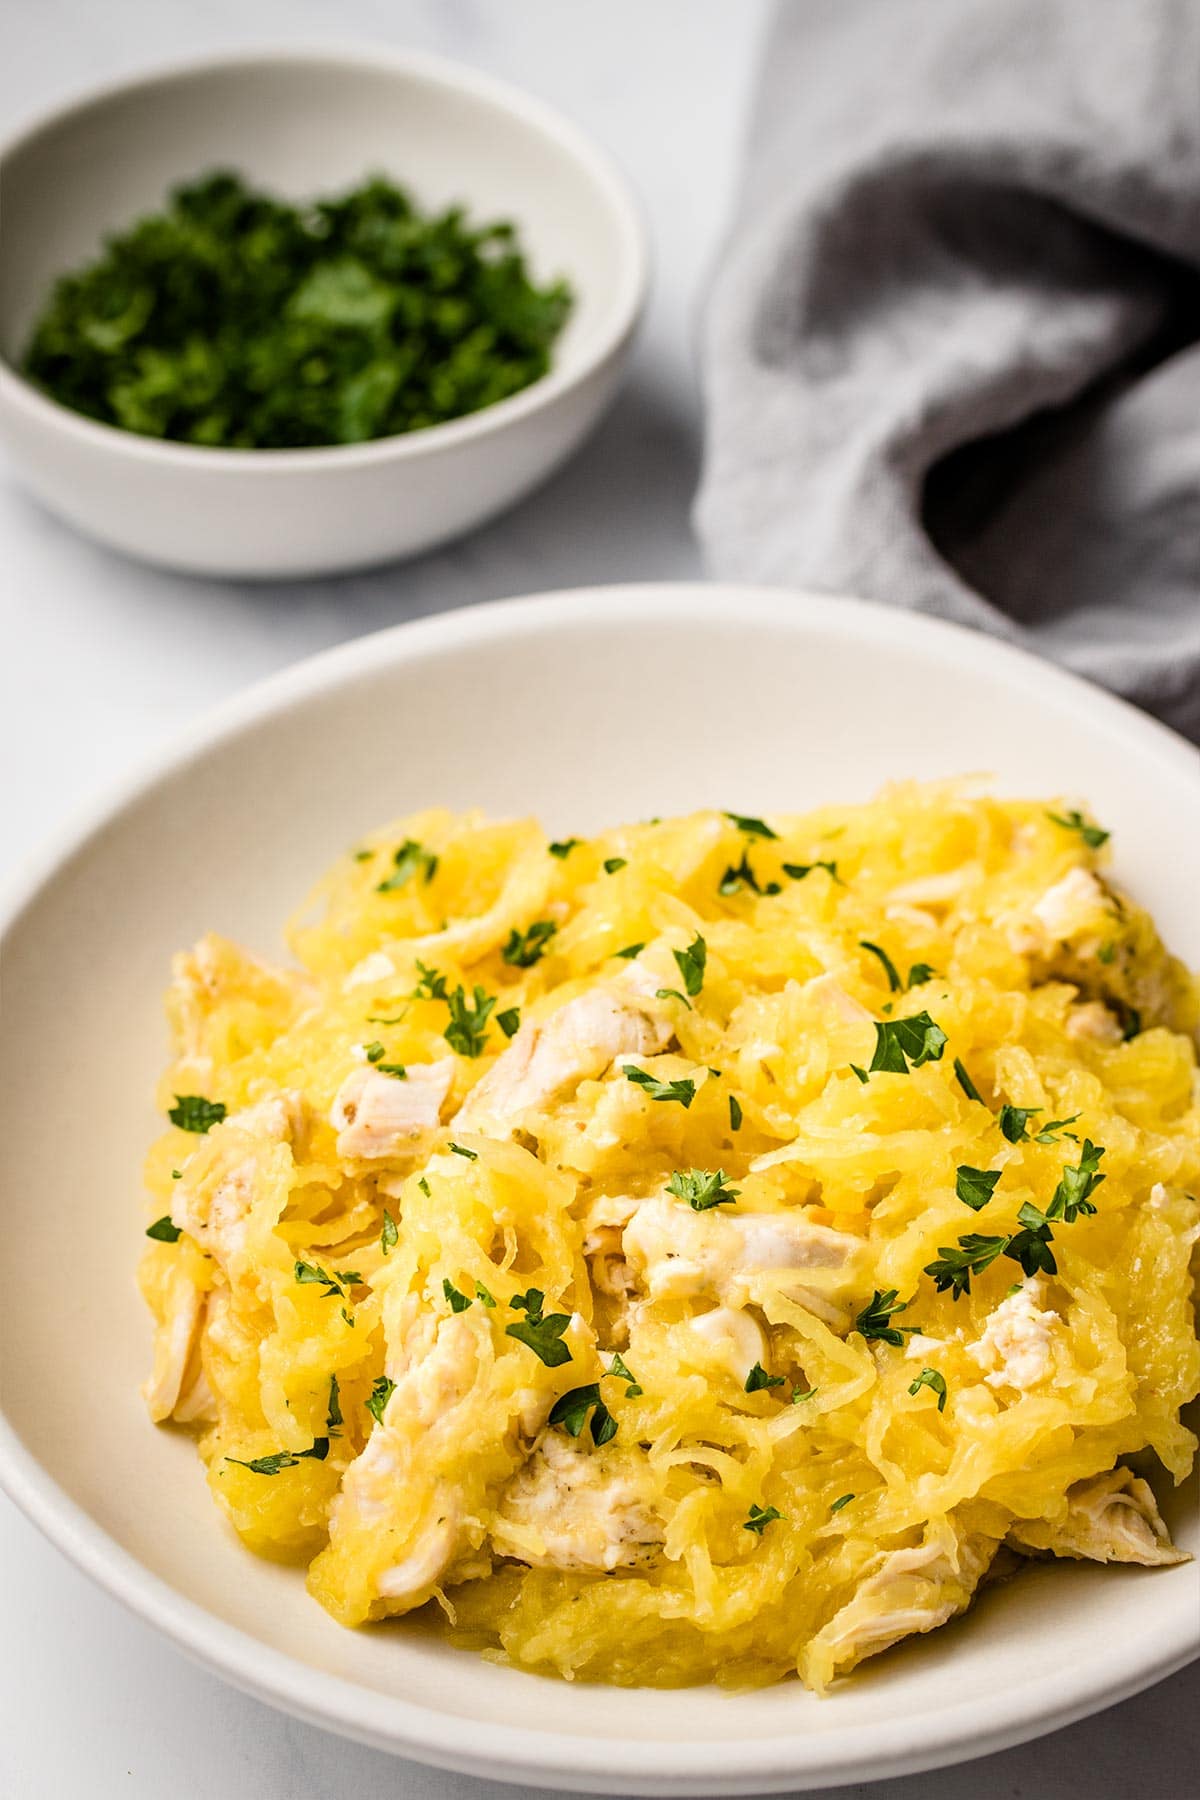 Spaghetti squash mixed with sliced chicken garnished with fresh parsley on a white plate, next to a bowl of parsley and a grey linen.